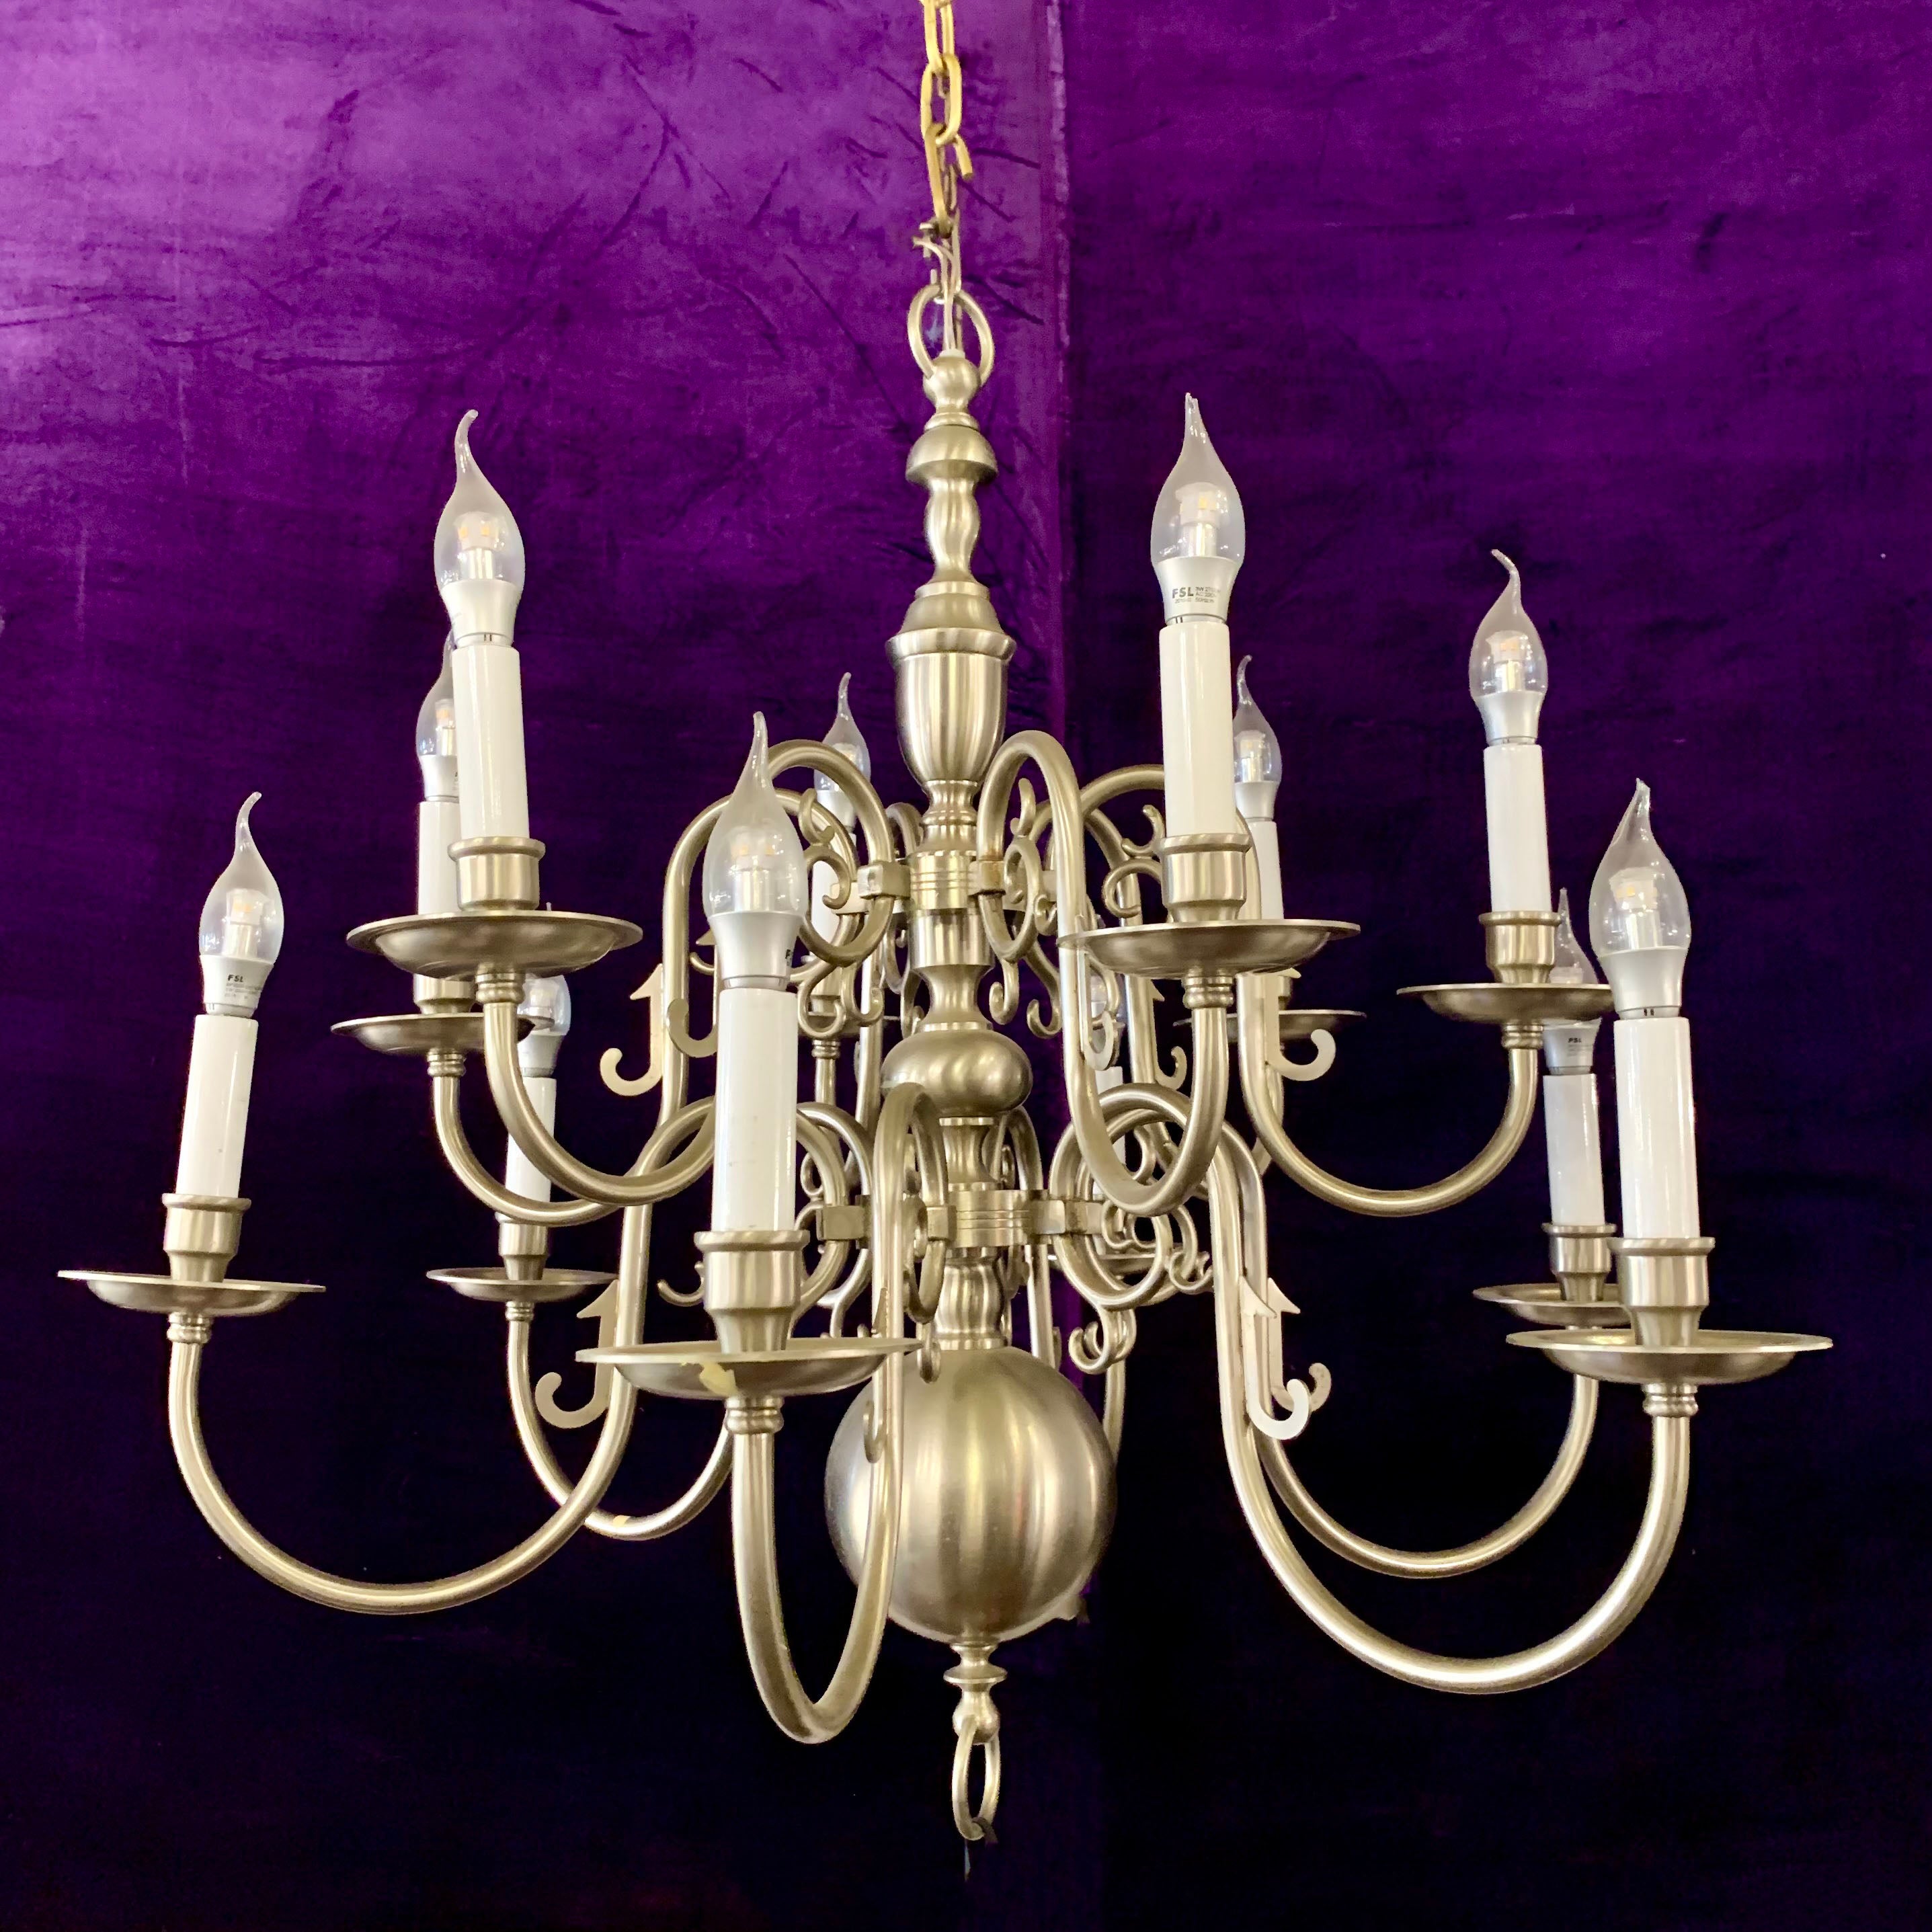 Double Tier Antique Flemish Chandelier in Aged Nickel Finish